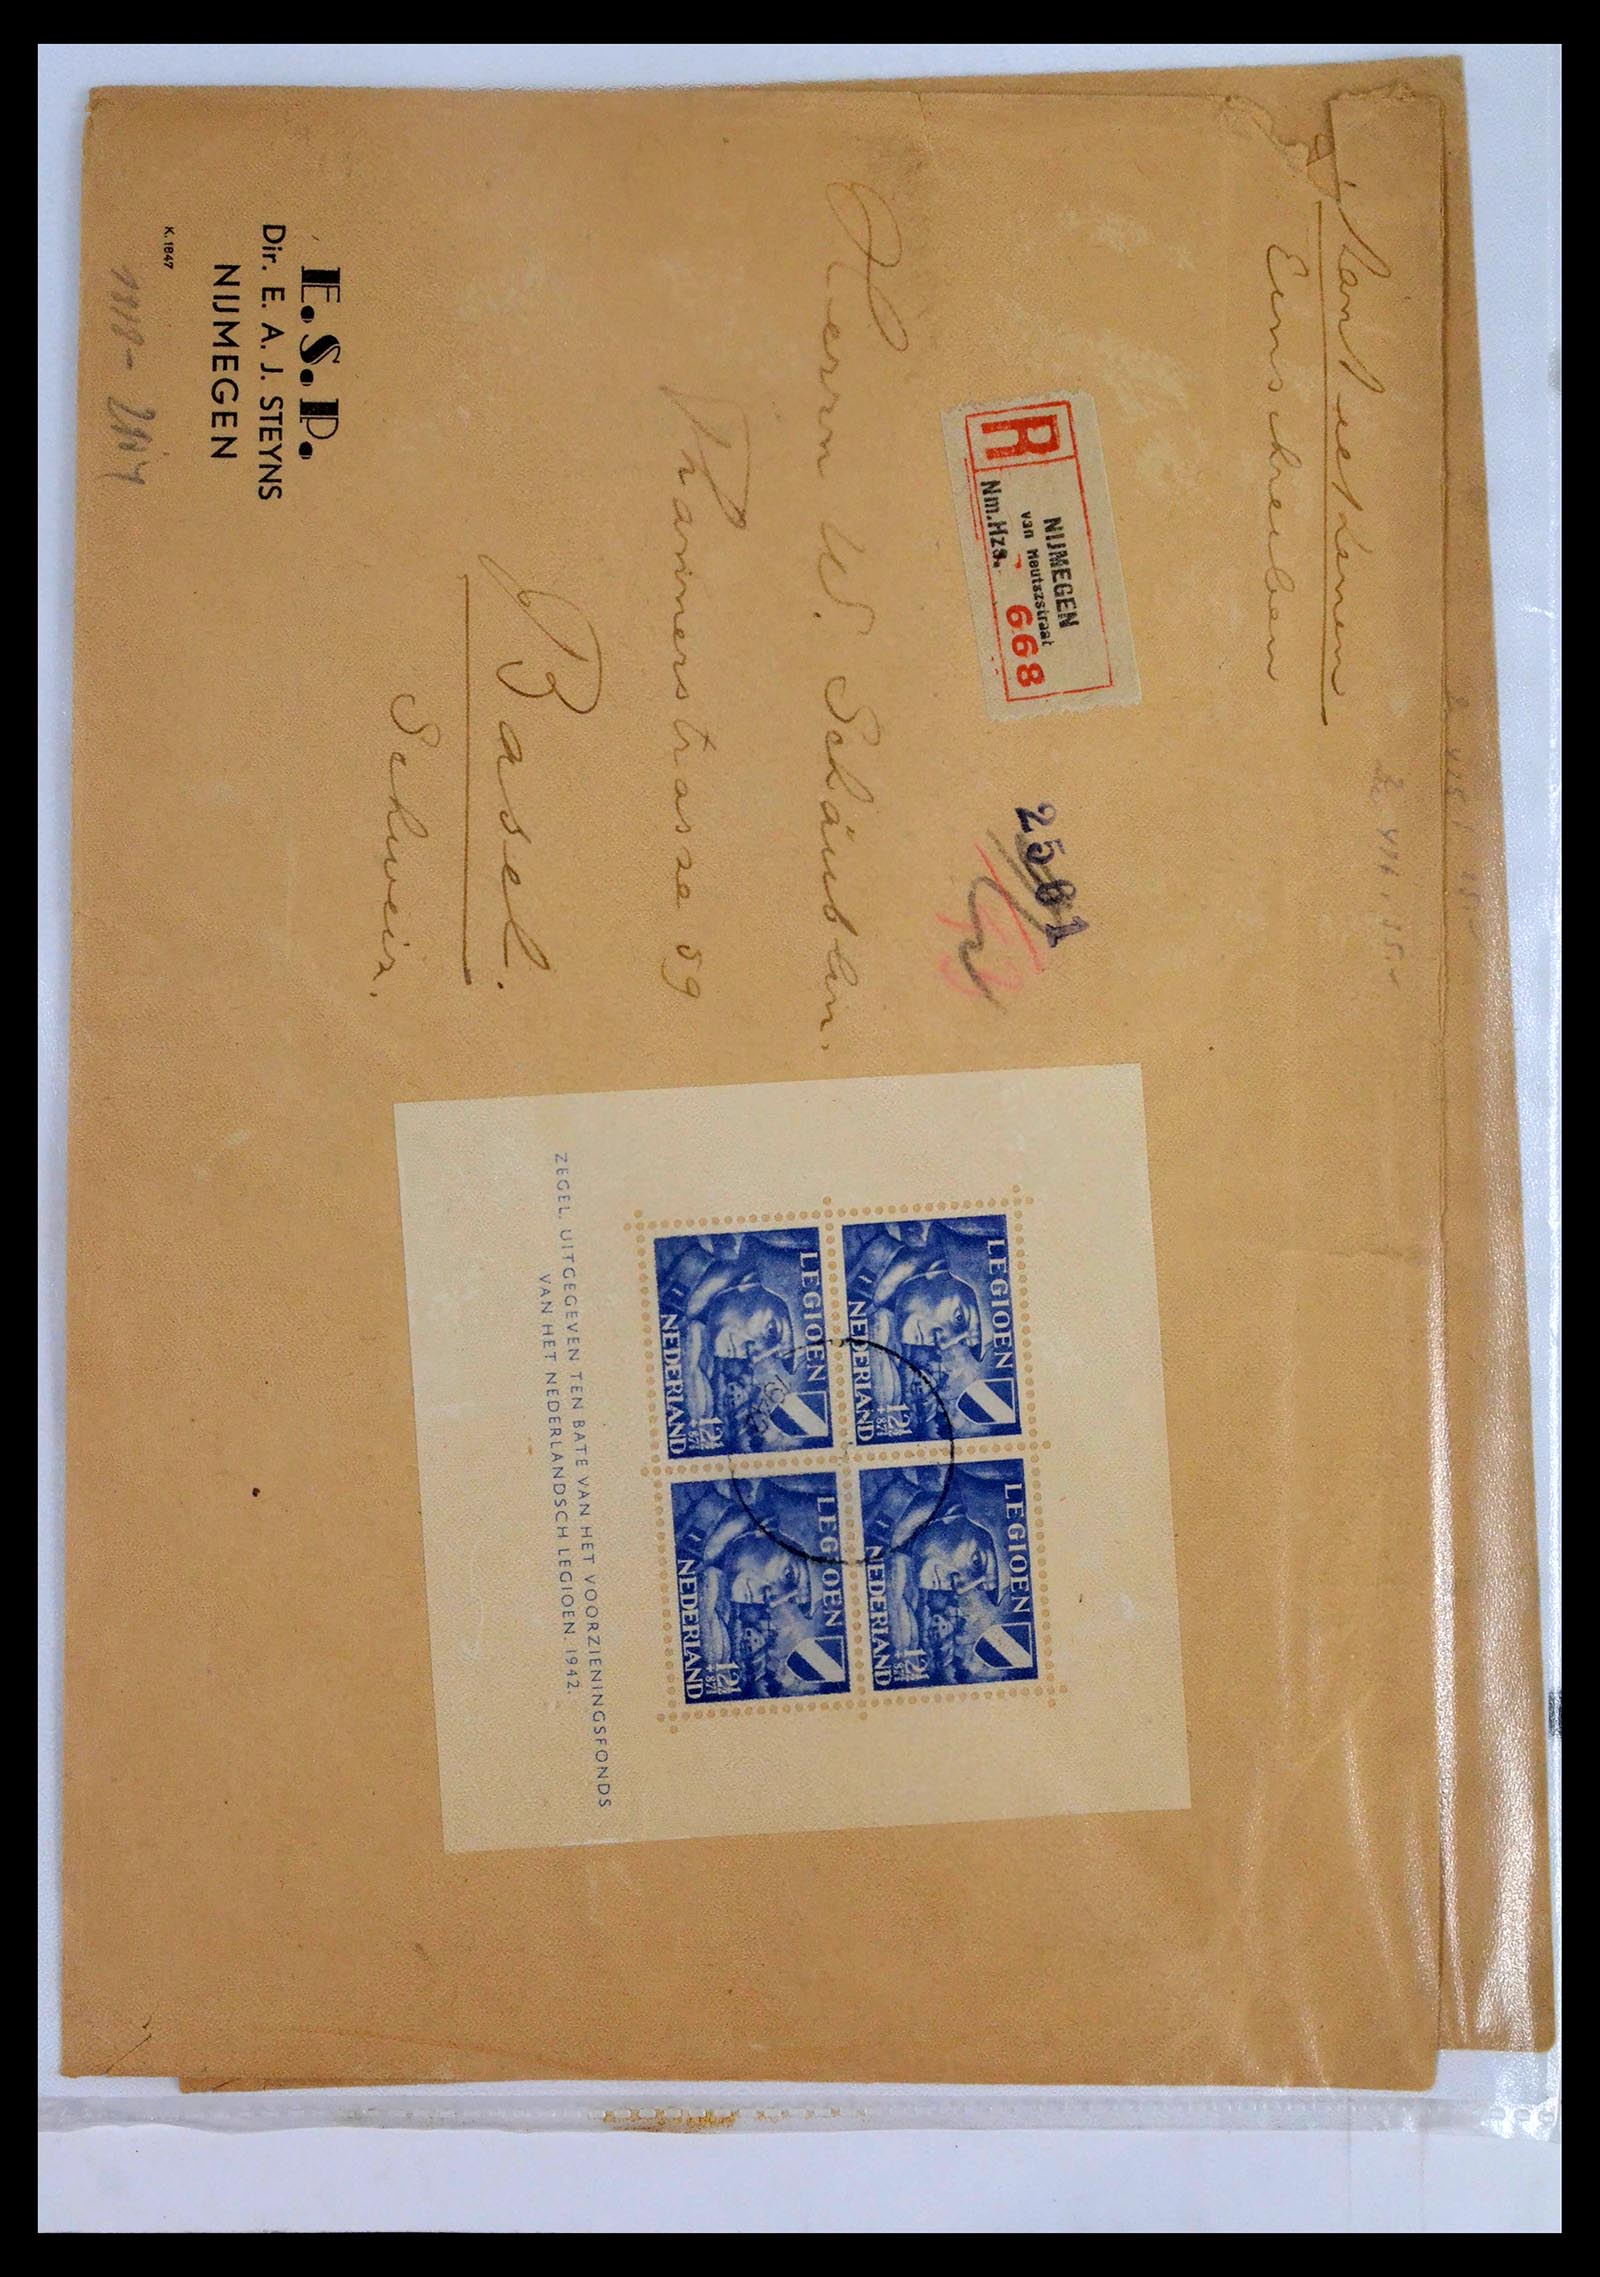 39429 0002 - Stamp collection 39429 Netherlands covers 1821-1955.